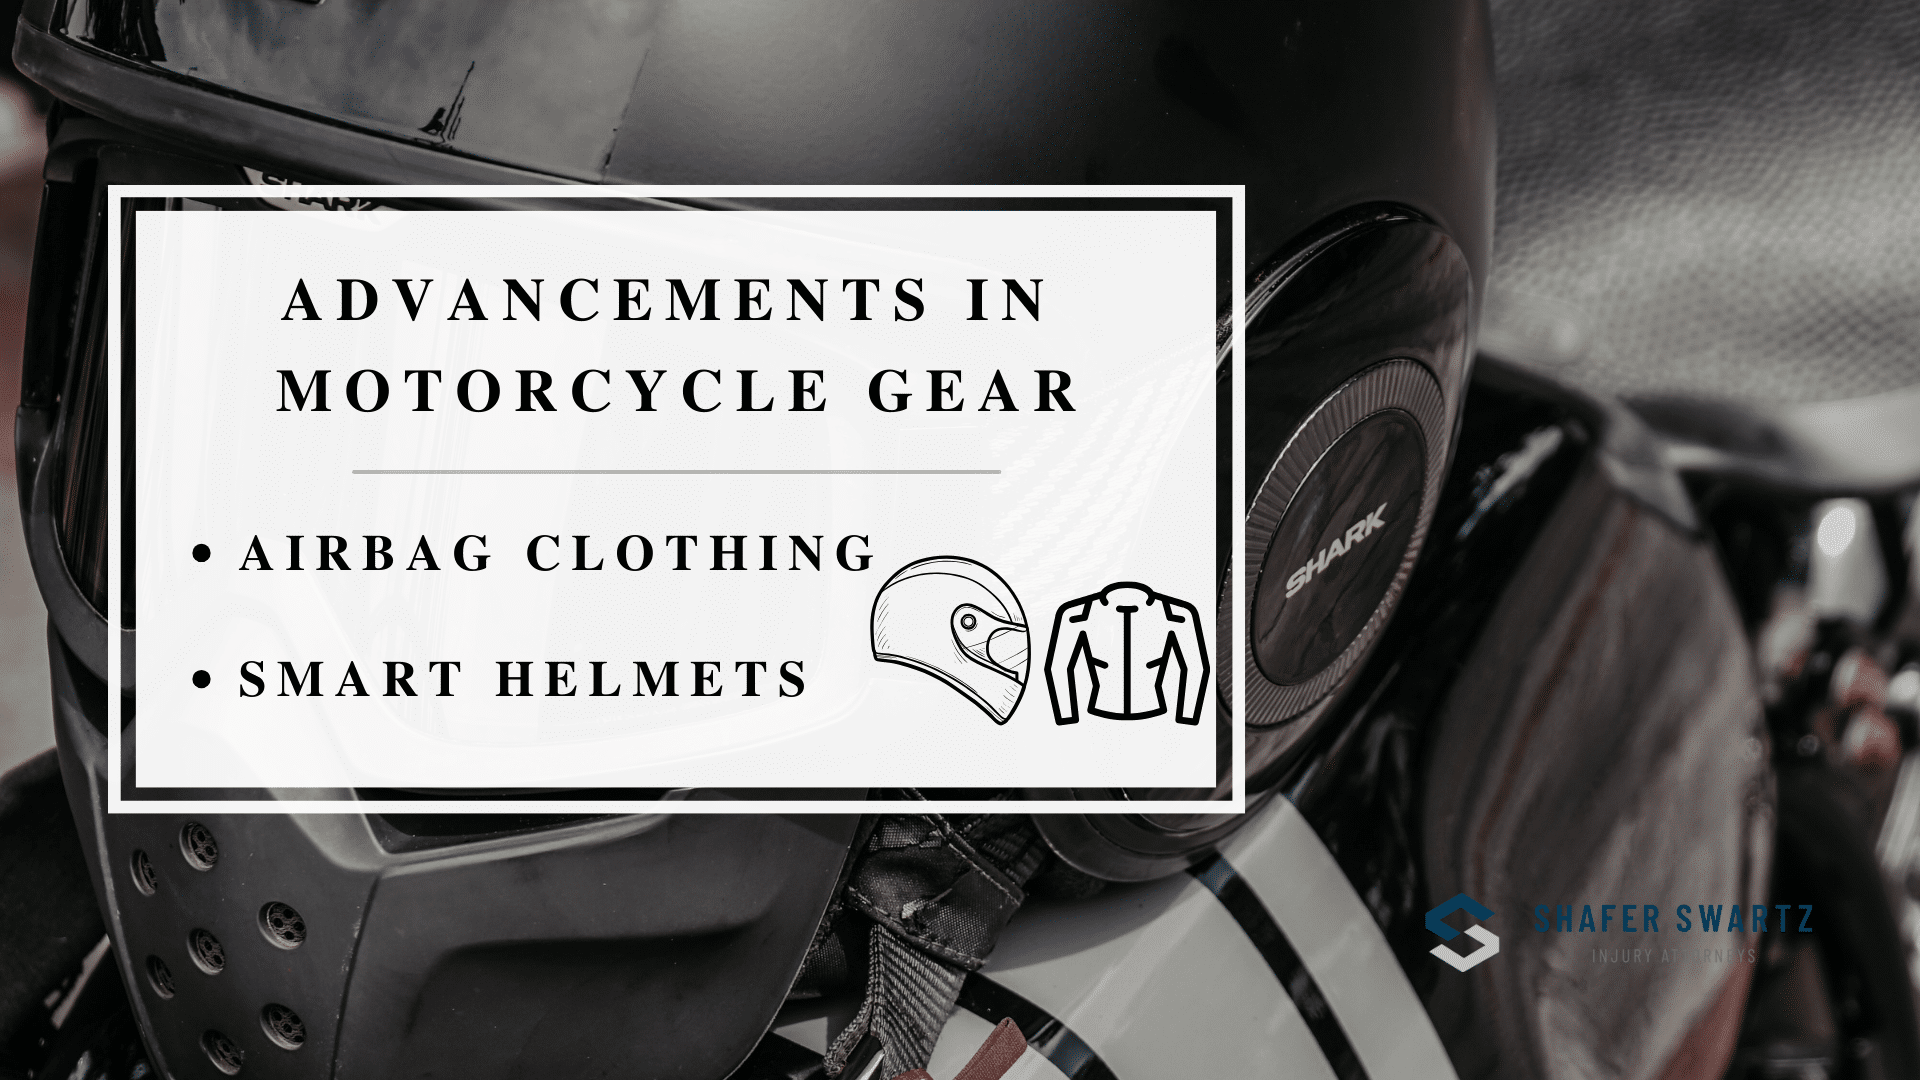 Infographic of the advancements in motorcycle gear